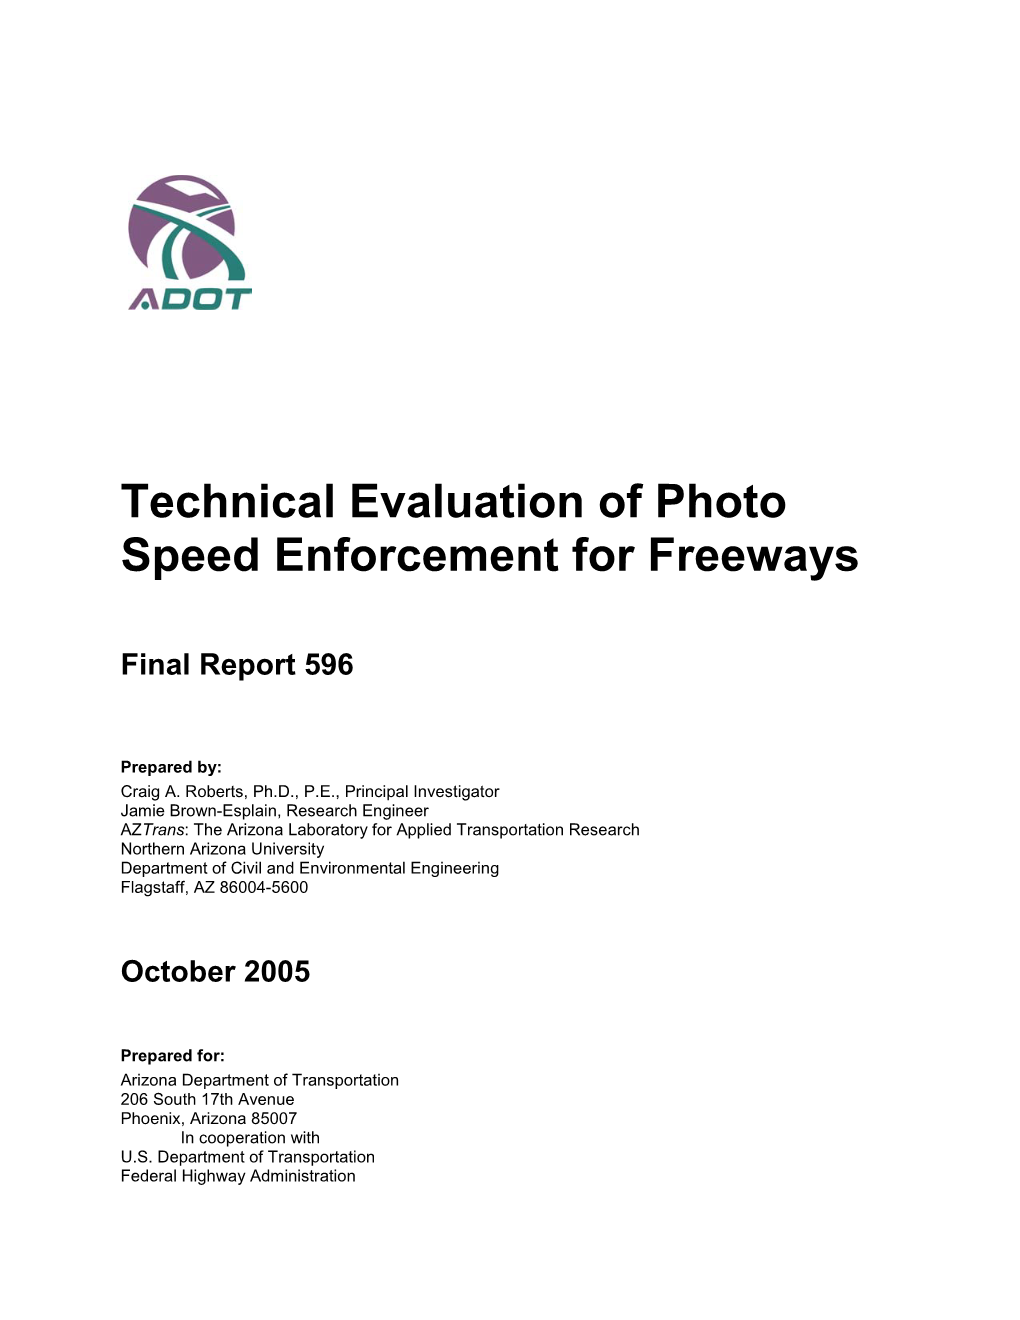 Technical Evaluation of Photo Speed Enforcement for Freeways